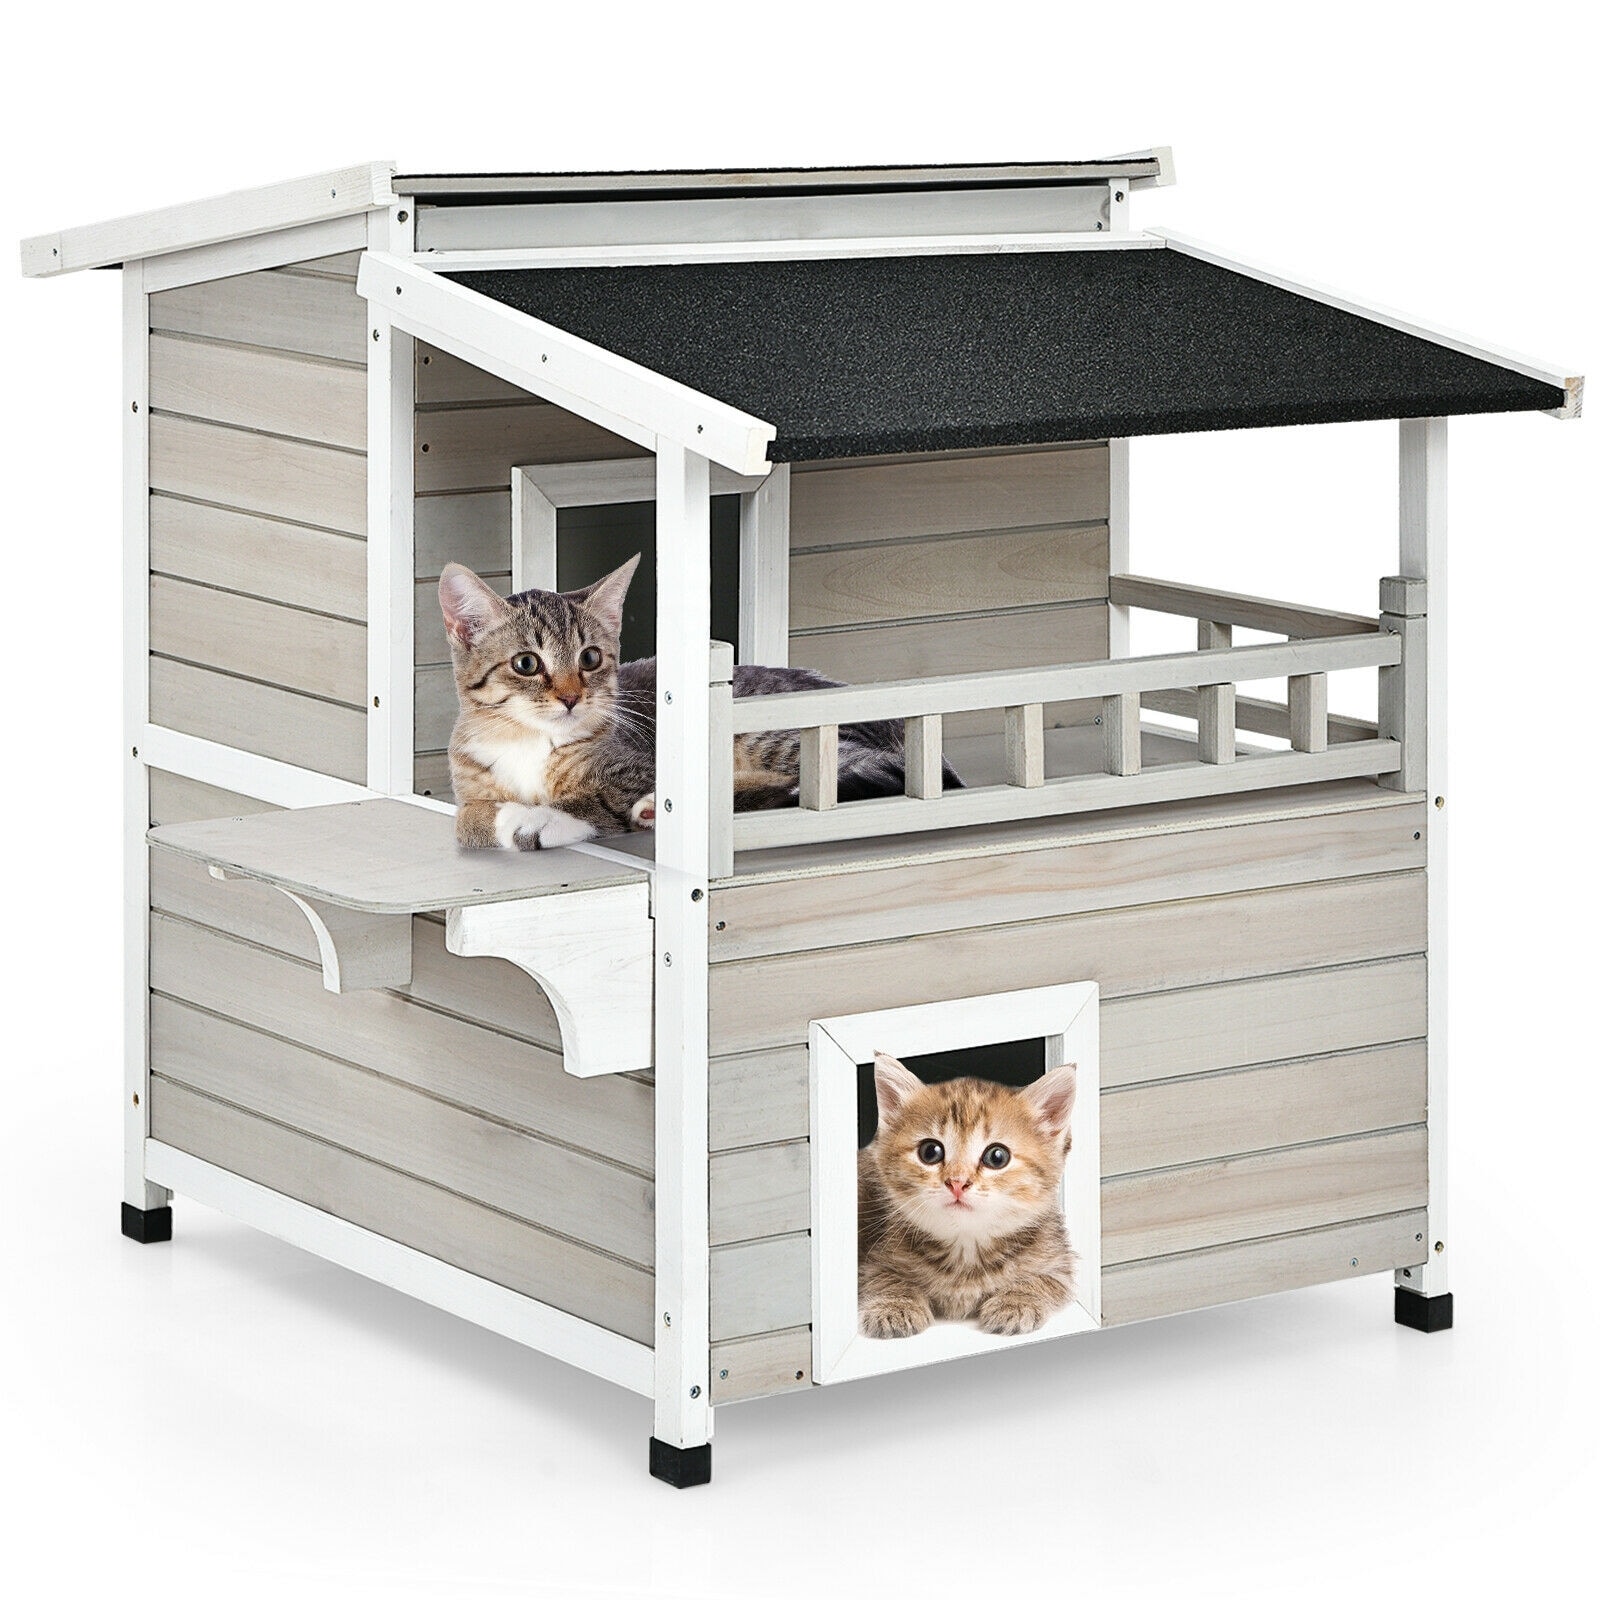 Insulated Outdoor Pet House with Platform  Outdoor cat shelter, Outdoor cat  house, Cat house diy